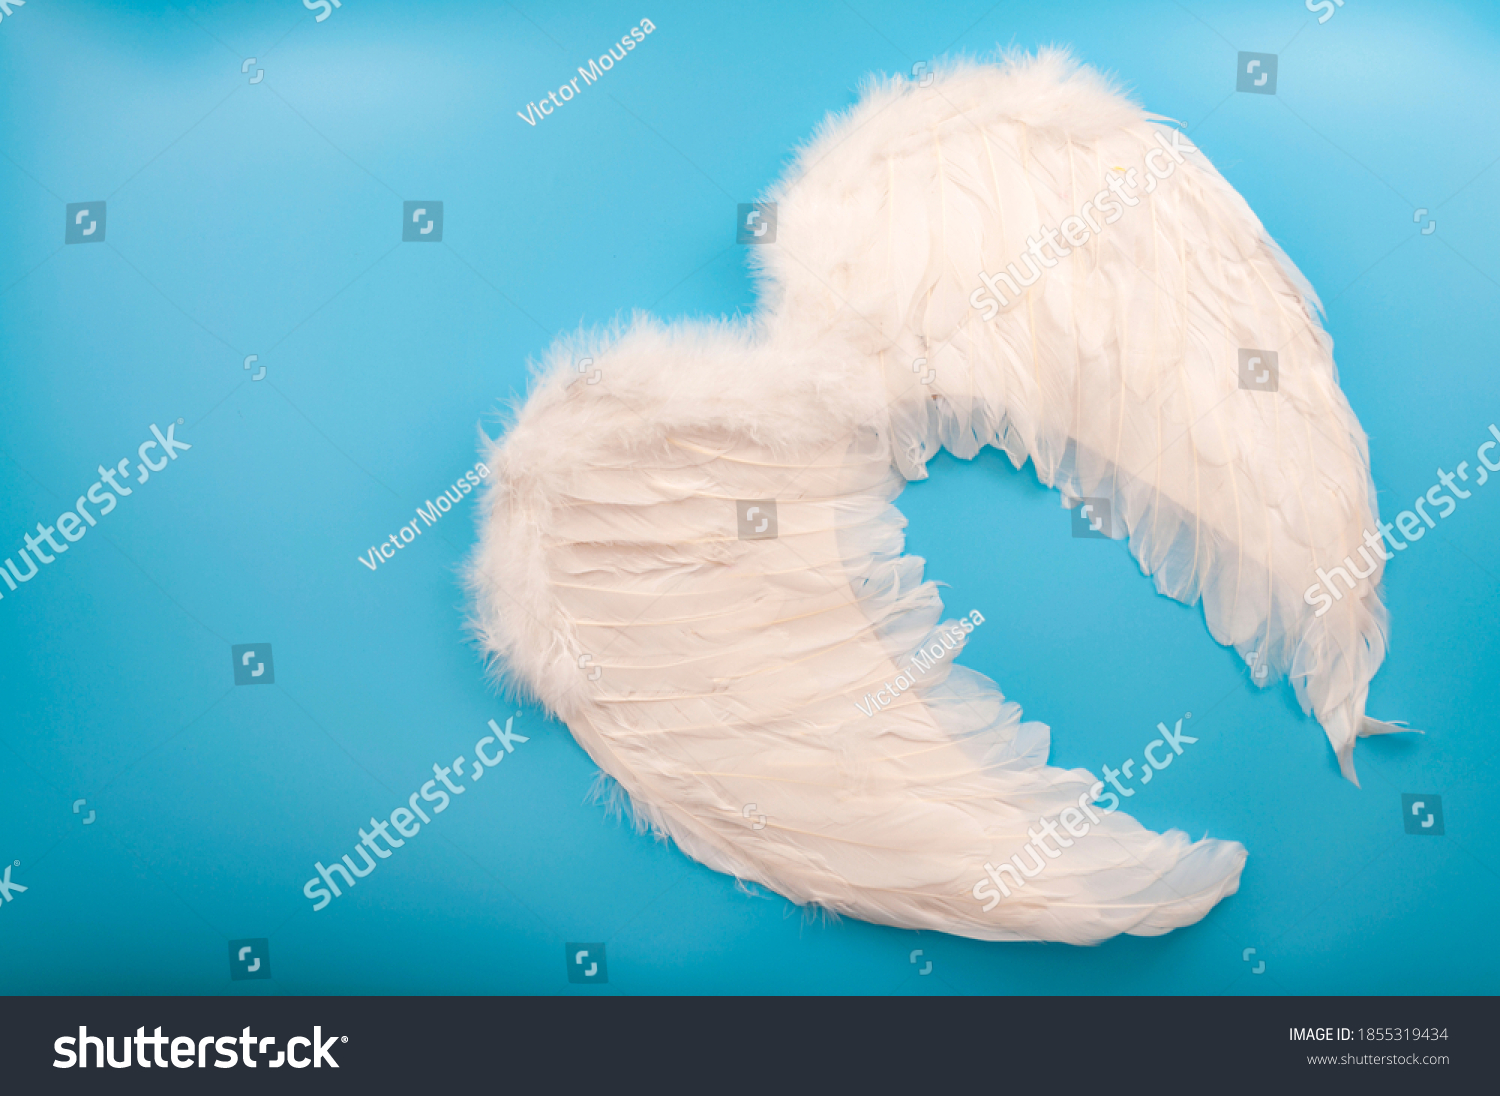 Innocence and purity, Christian mythology and innocent celestial creatures concept with guardian angel wings made of white feathers isolated on blue background with copy space #1855319434